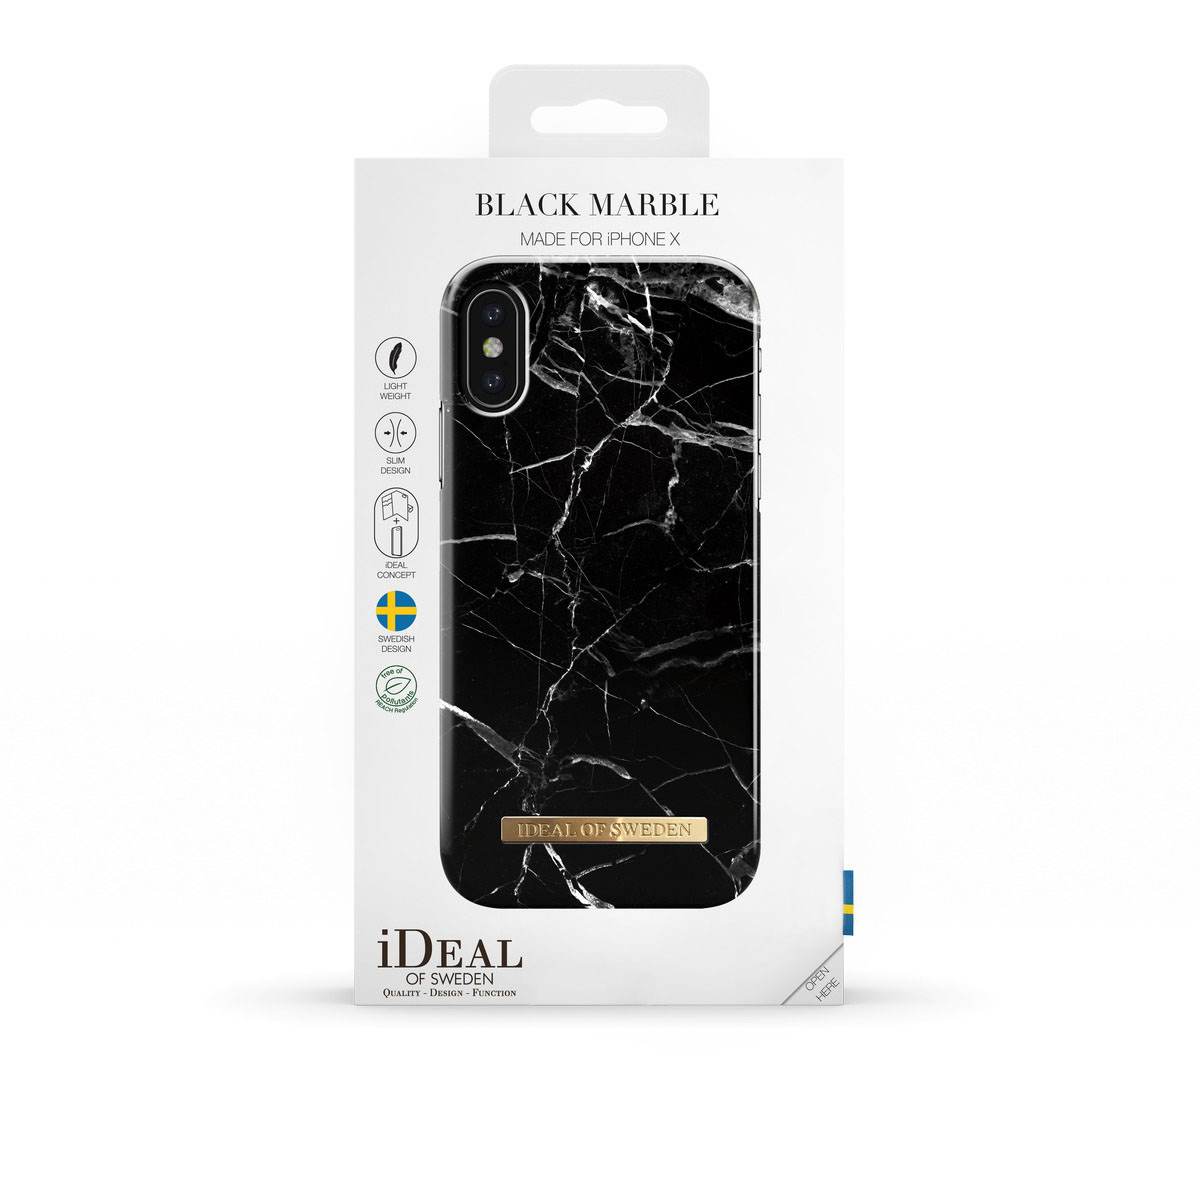 Fashion, IDEAL X, Apple, Black Marble SWEDEN OF iPhone Backcover,